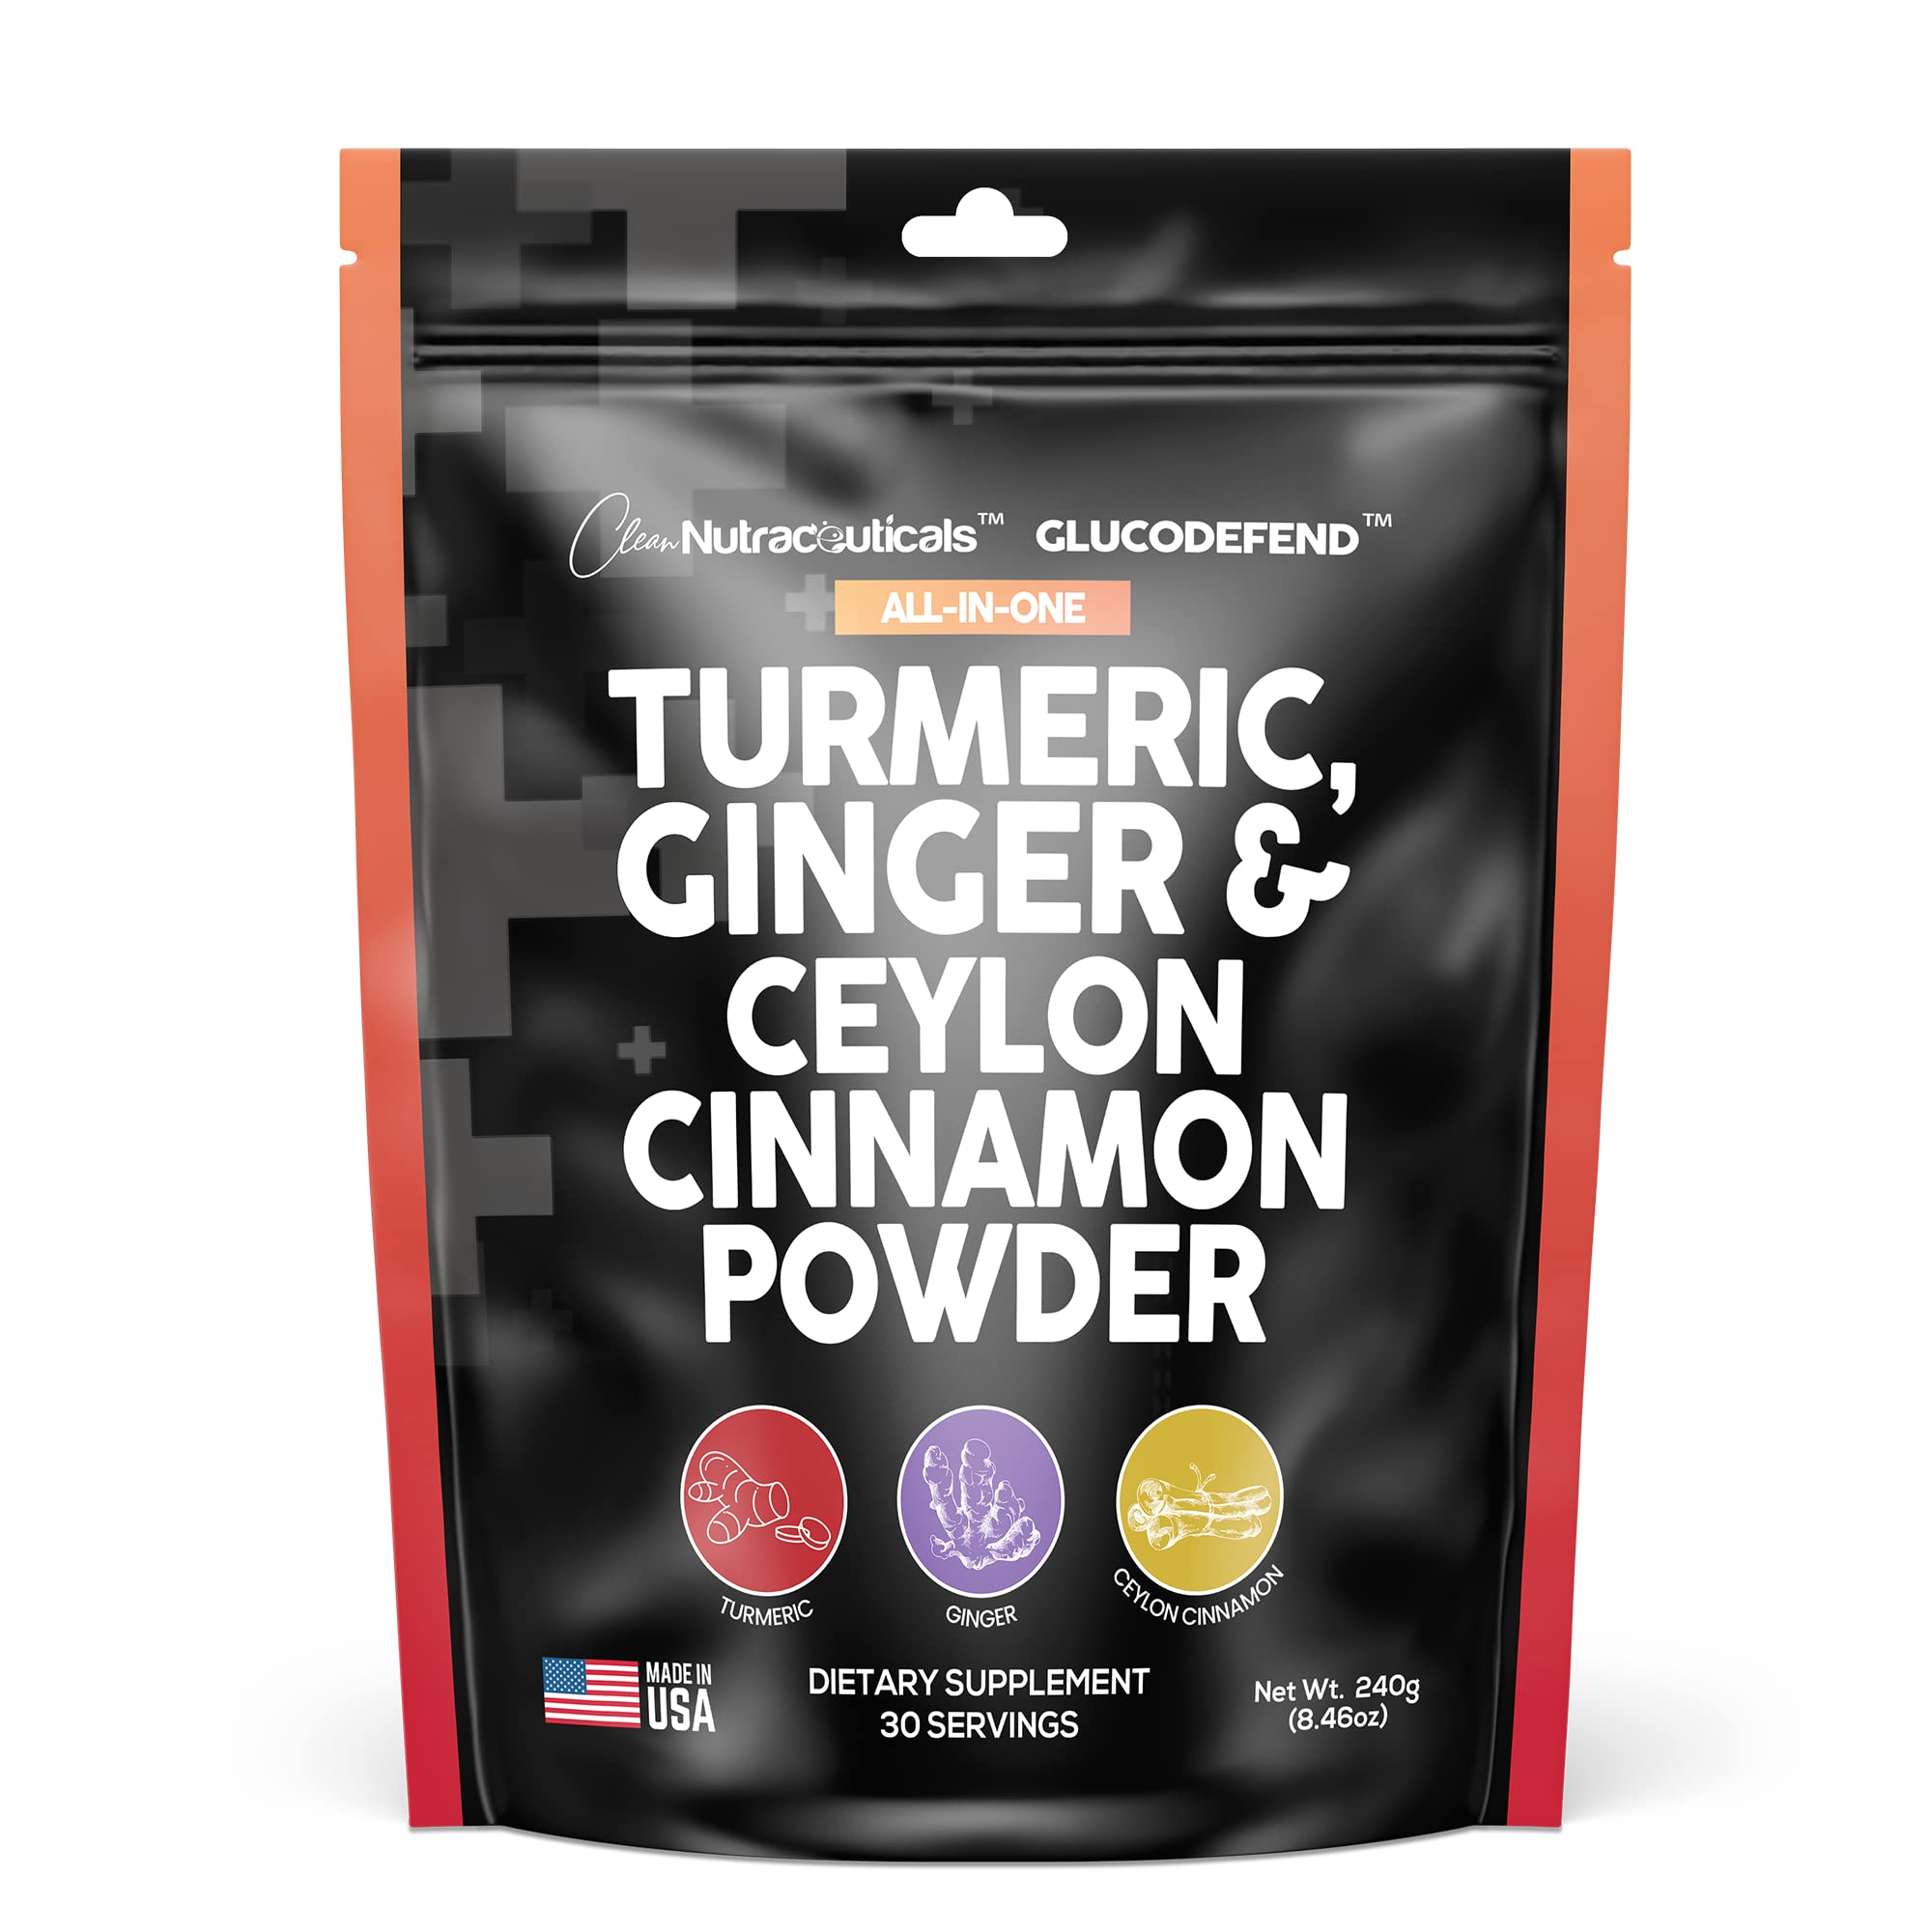 3in1 Turmeric Curcumin Ginger Root & Ceylon Cinnamon Powder Supplement Made in USA - Turmeric Powder for Health, Cooking, Baking - Premium Quality Ginger Powder - Alternative to Pills Capsules Tablets